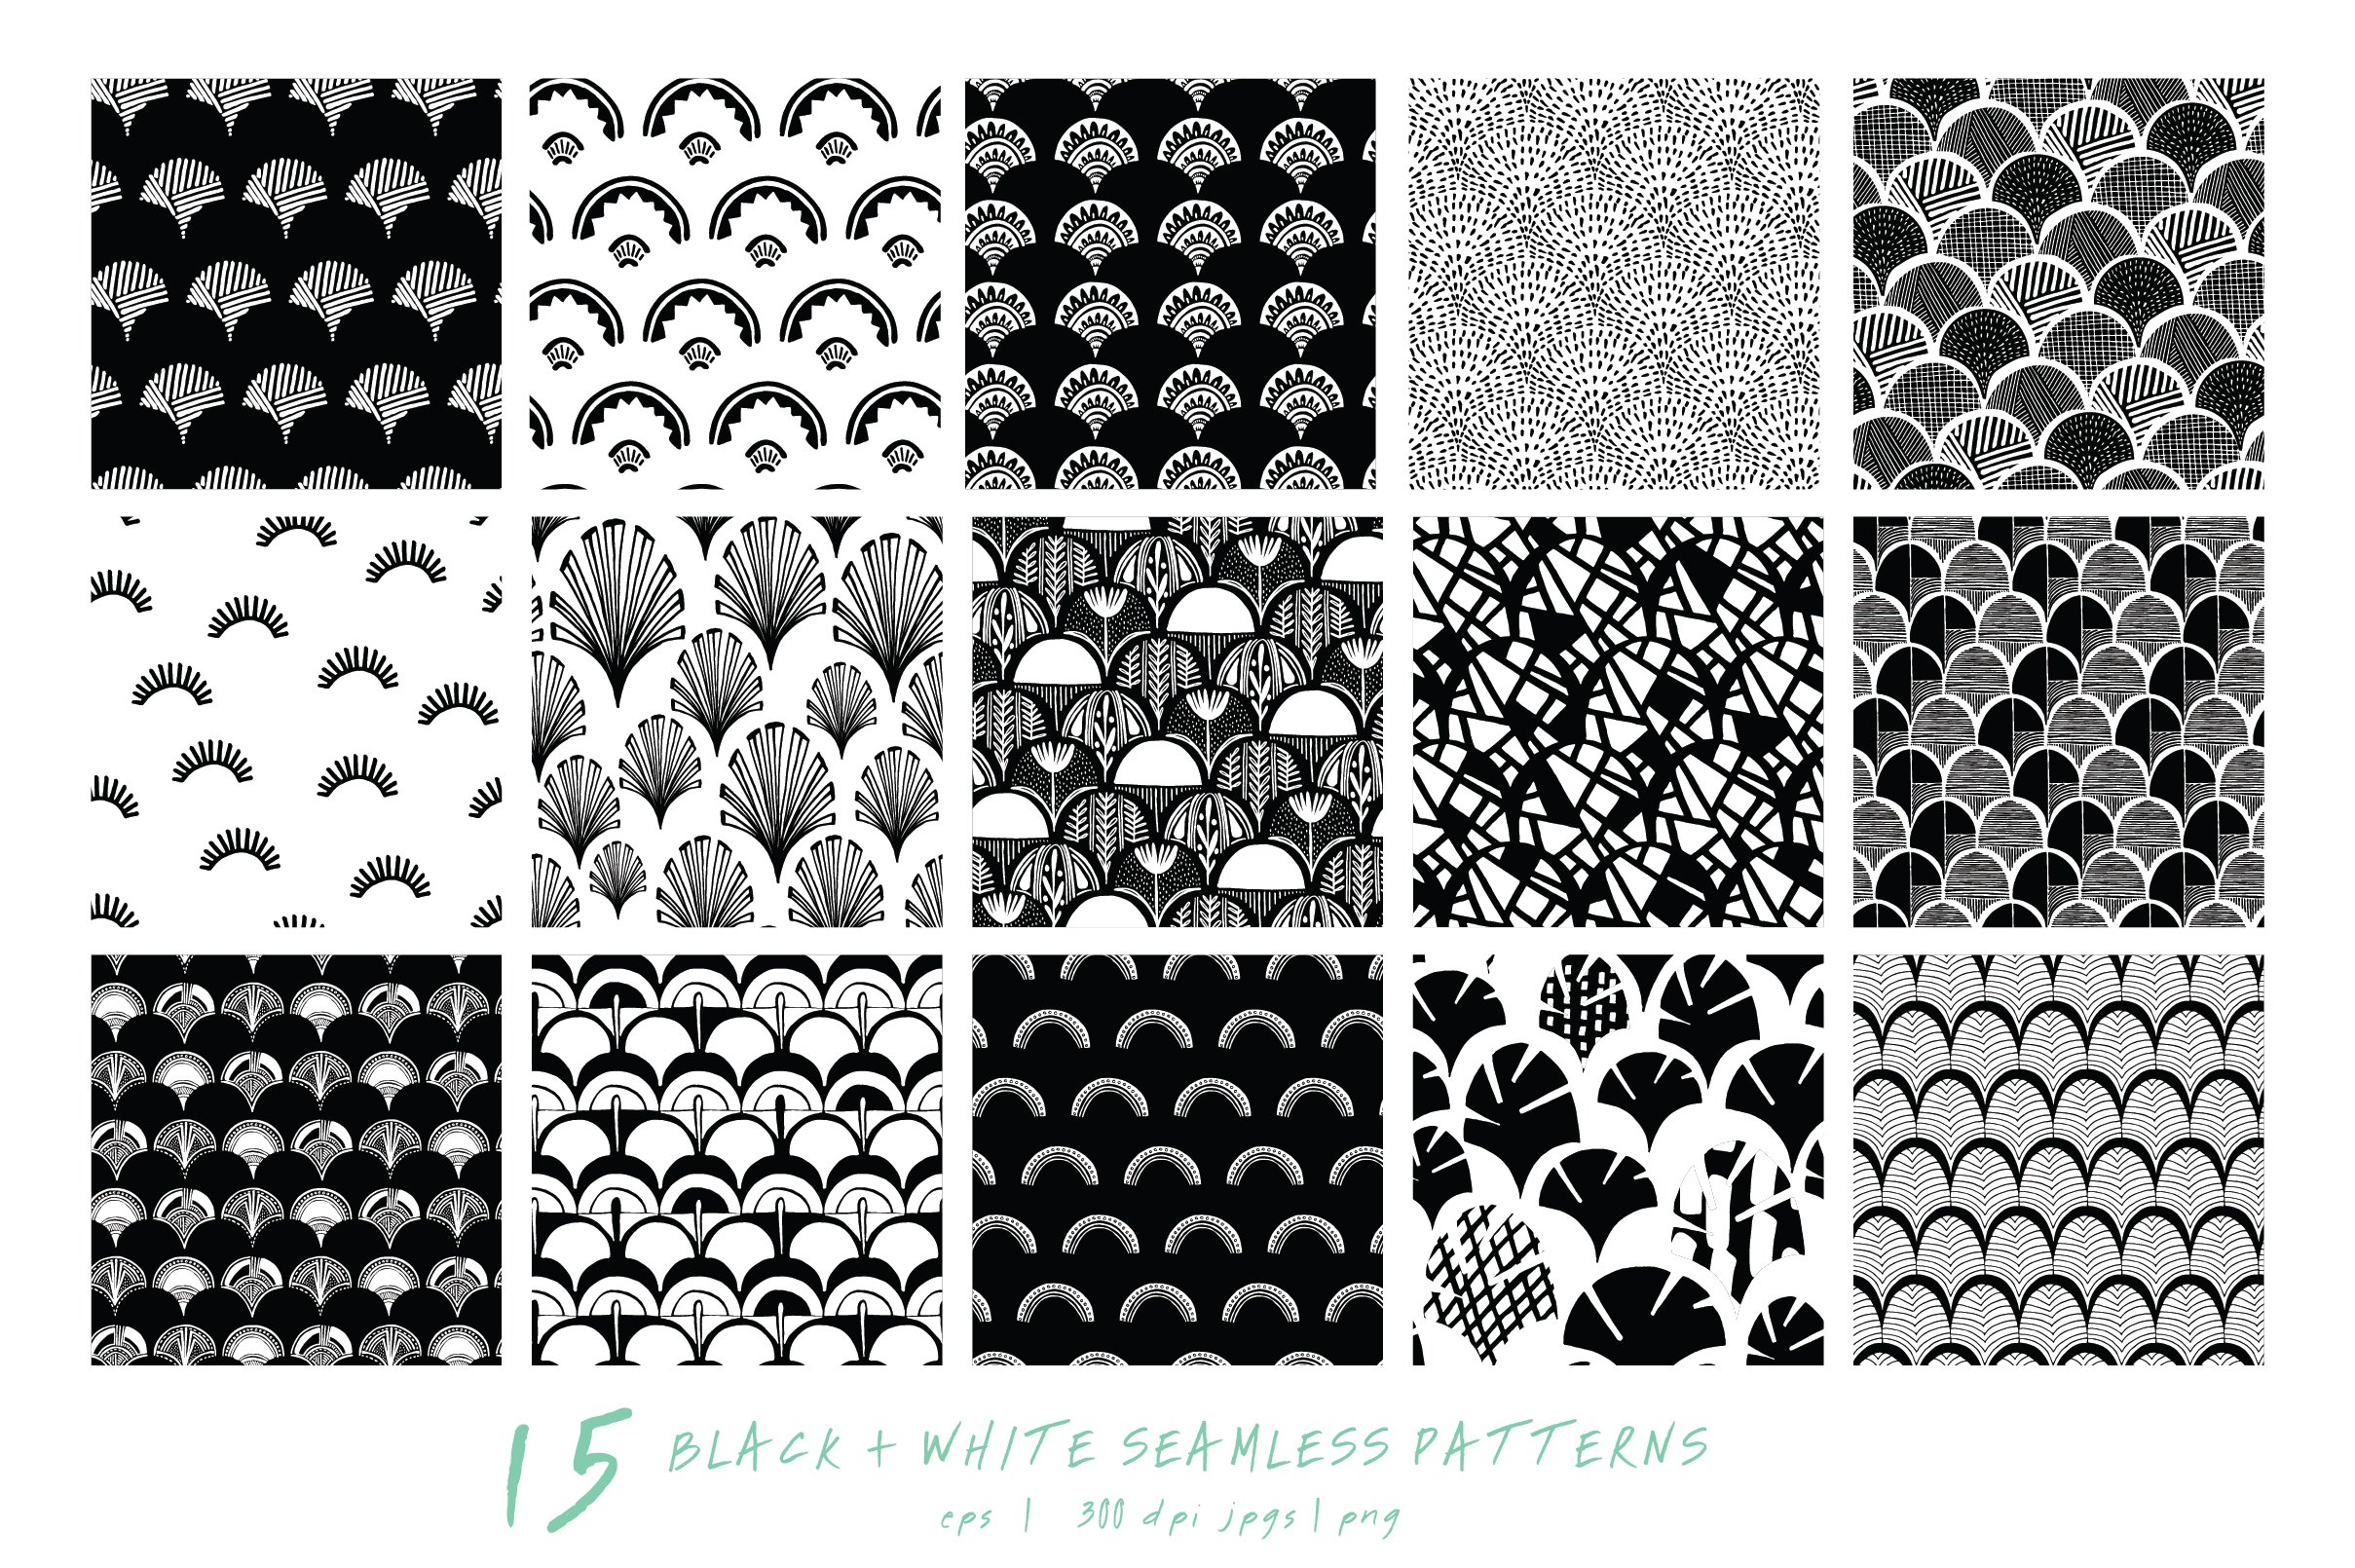 Hand-Drawn Scales Seamless Patterns